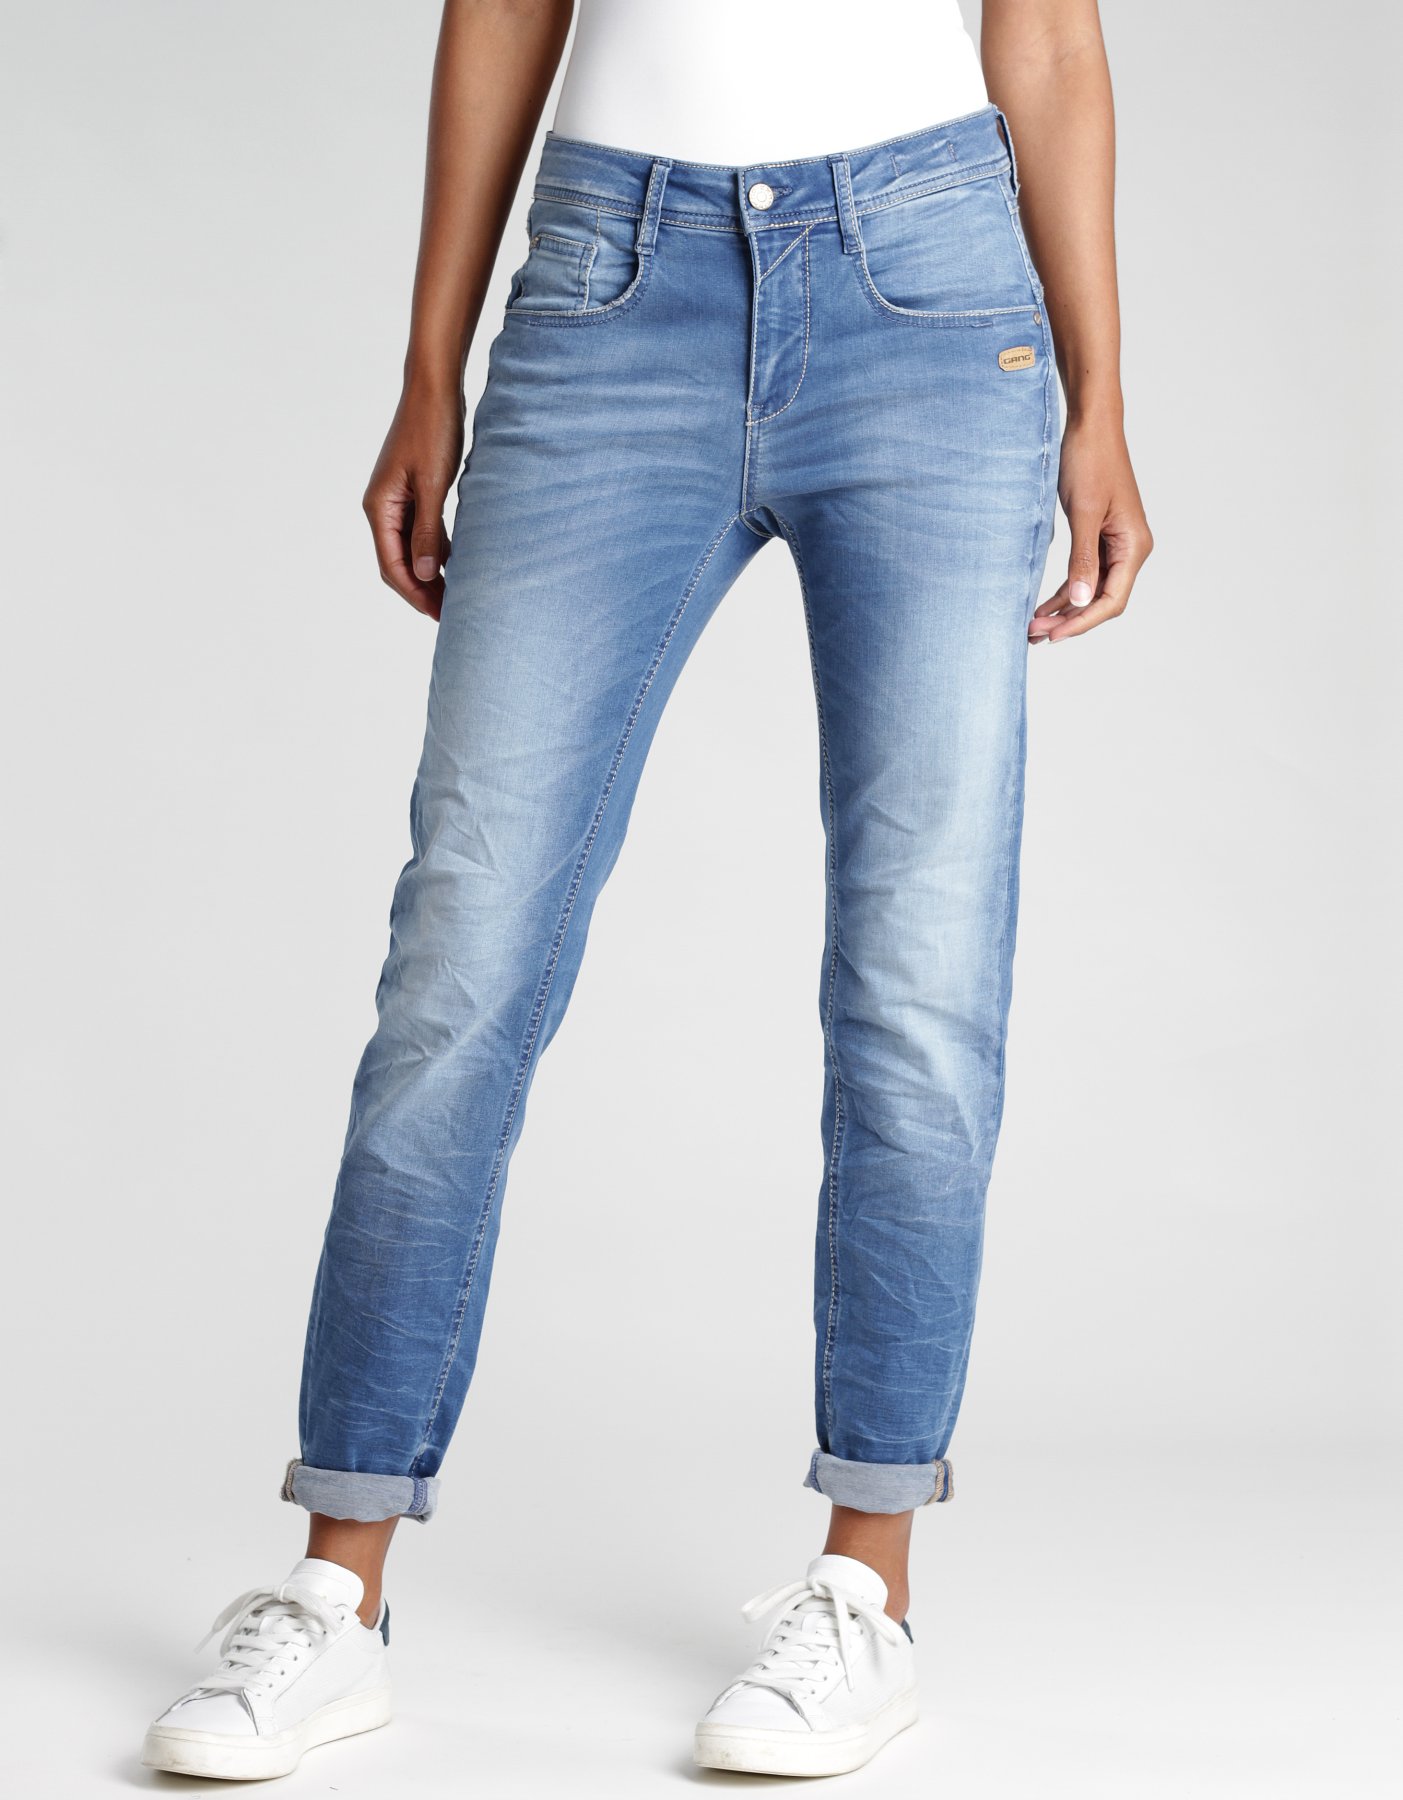 GANG | Engelheym JEANS CROPPED-RELAXED Jeans DAMEN FIT 94AMELIE Hosen TRULY | VINTAGE | DOWN